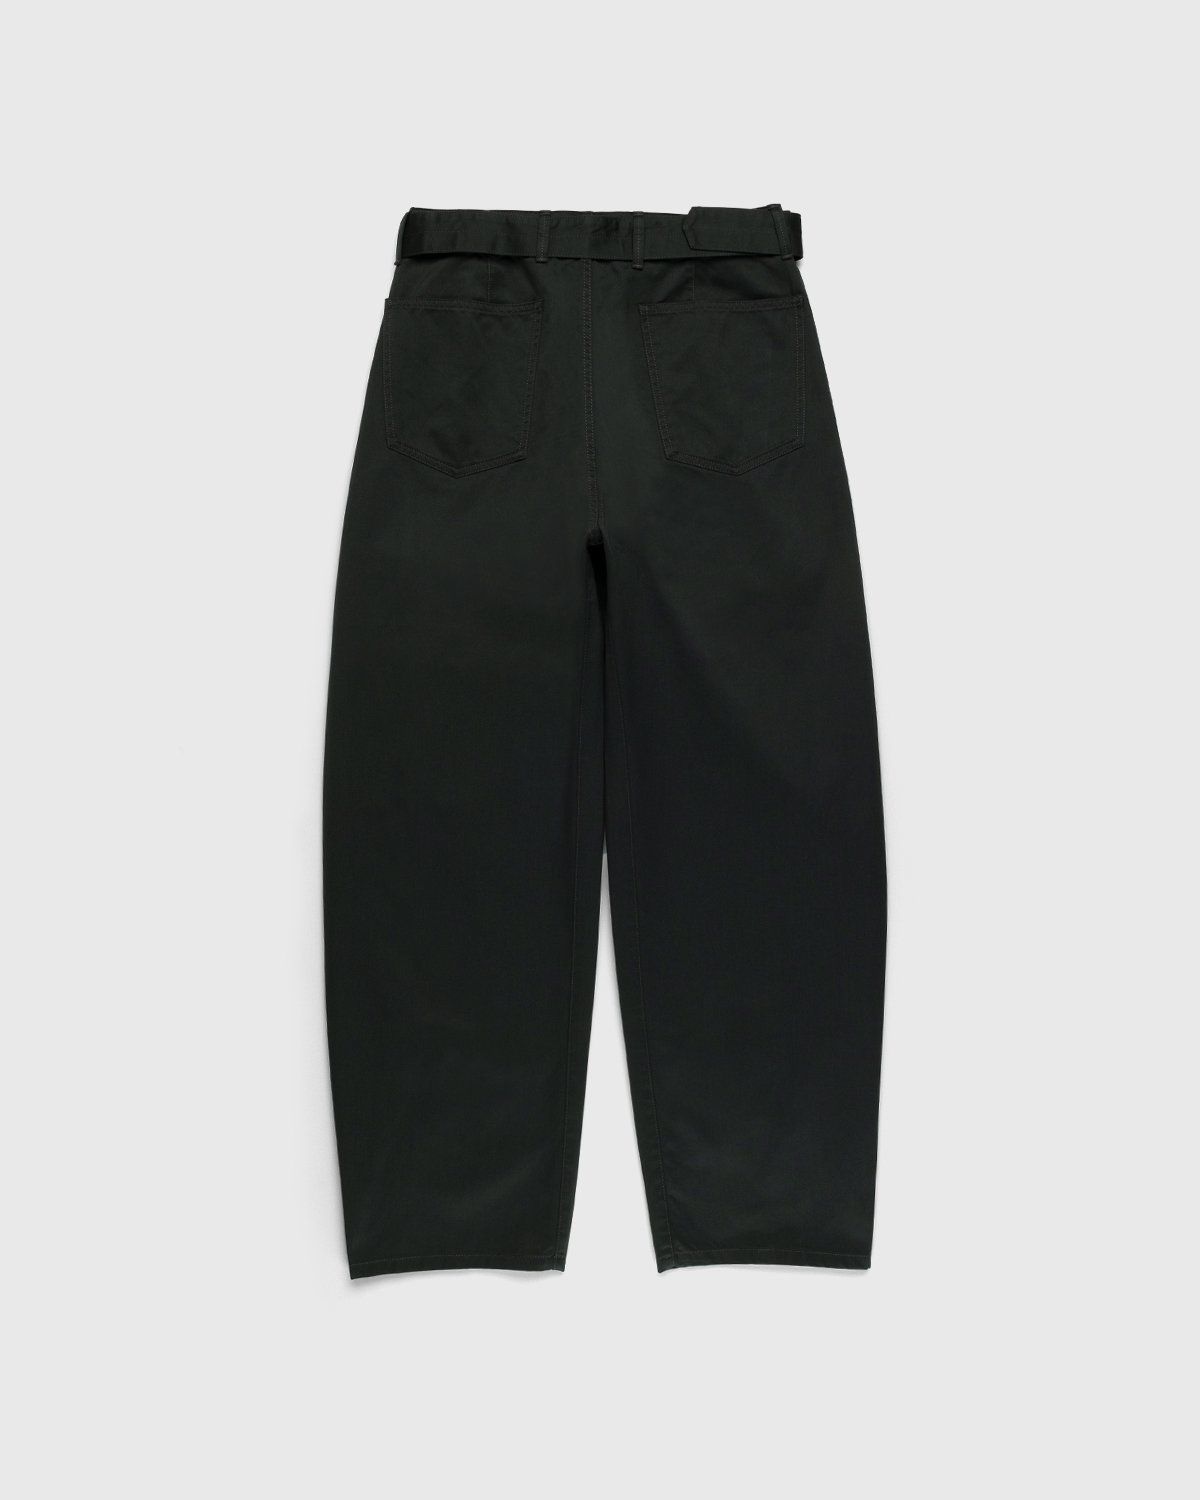 Lemaire – Twisted Belted Pants Dark Slate Green - Trousers - Grey - Image 2